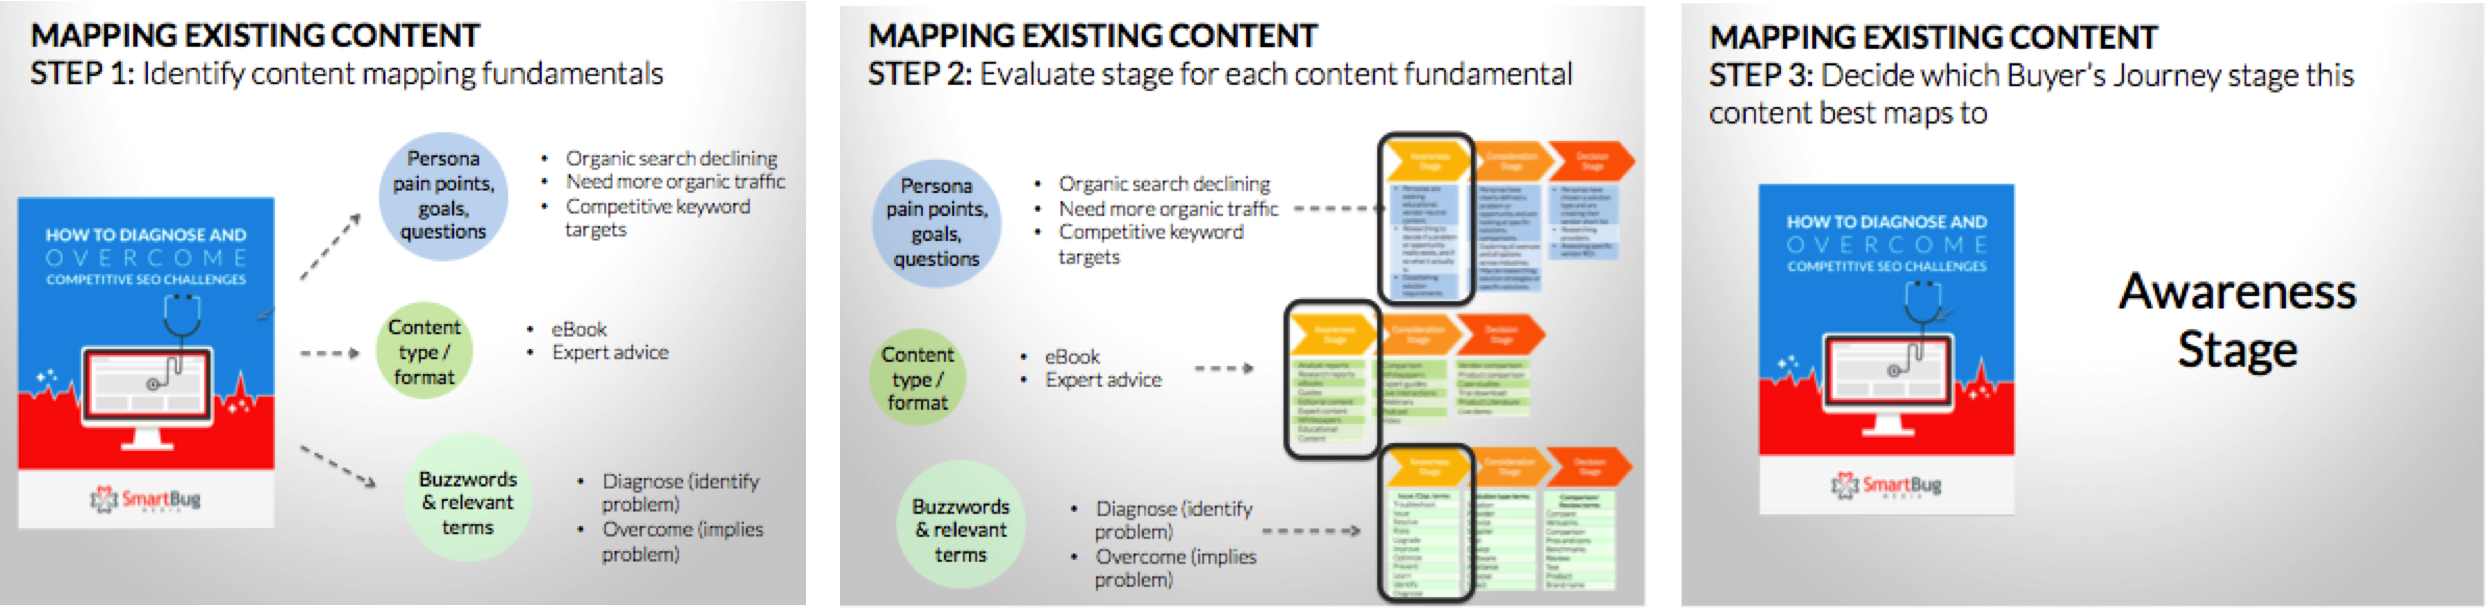 mapping_content_to_buyers_journey_example.png